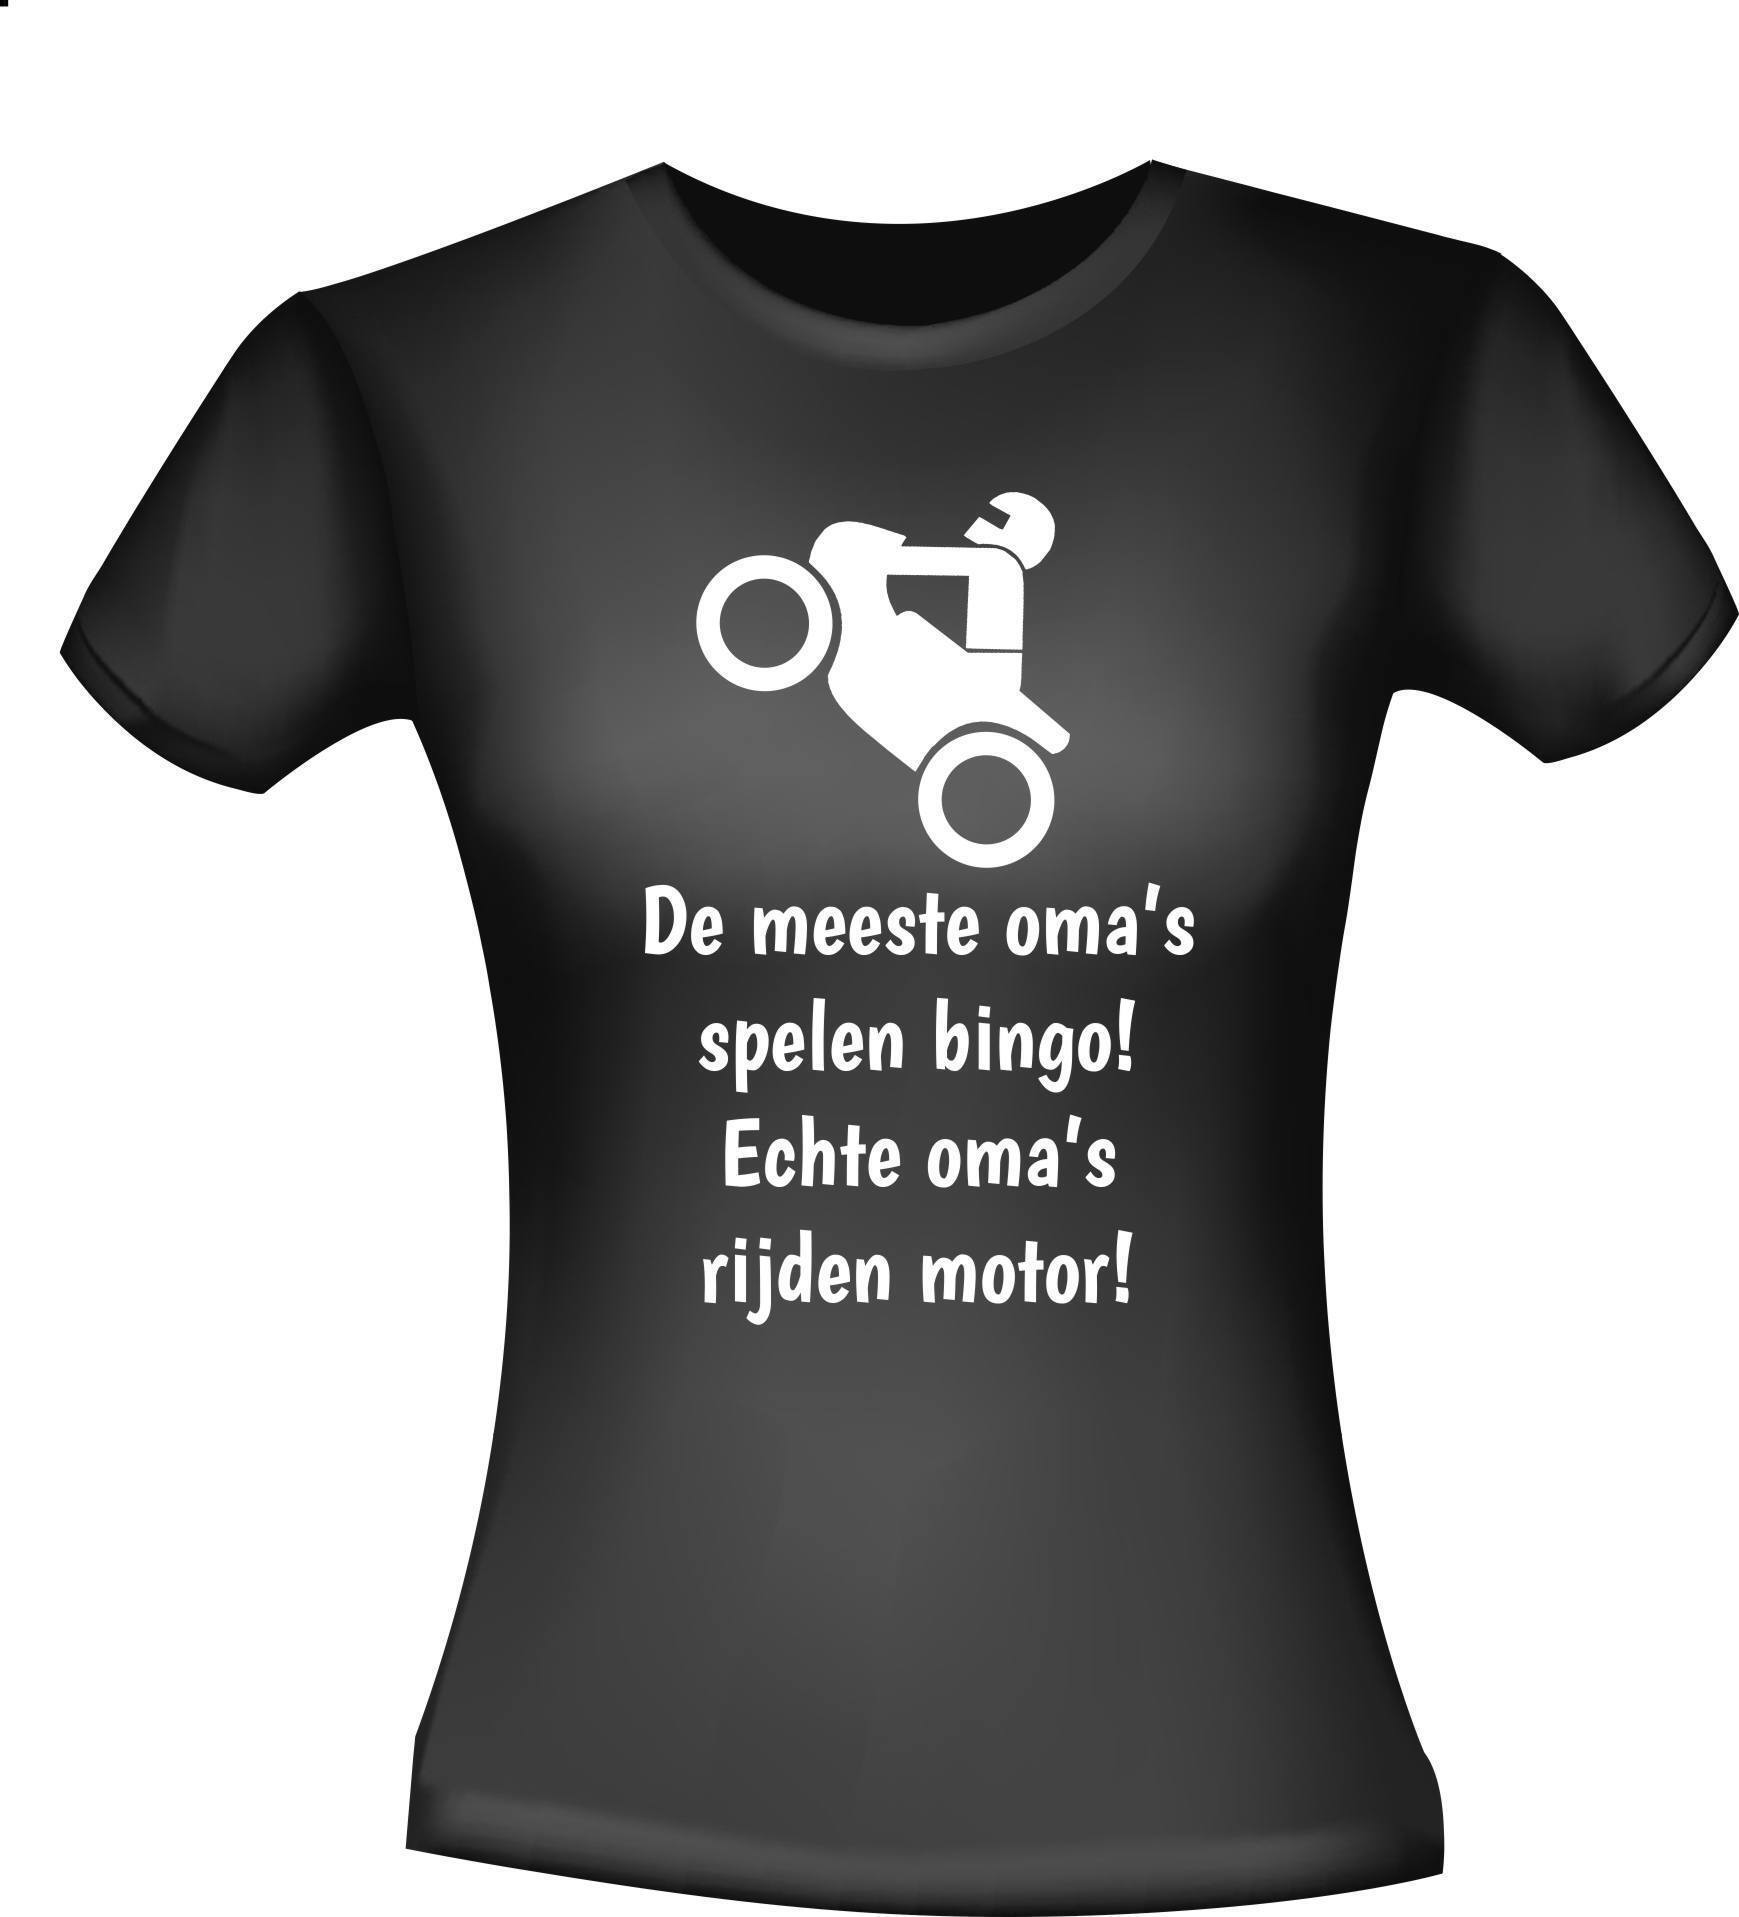 T-shirt voor stoere oma die motor rijdt! coole oma